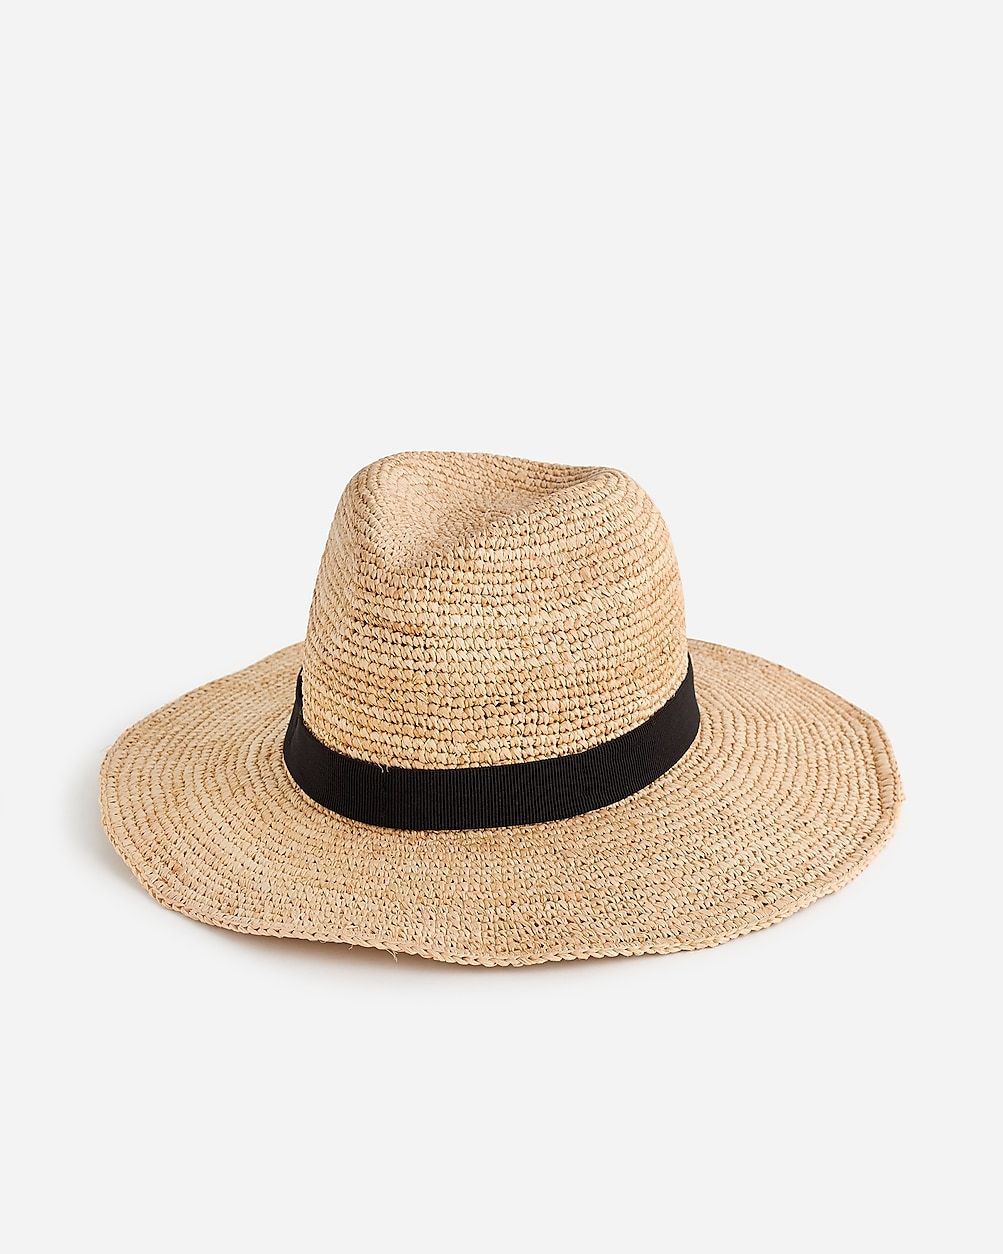 best seller4.5(432 REVIEWS)Wide-brim packable straw hat$26.50$69.50 (62% Off)Limited time. Price ... | J.Crew US